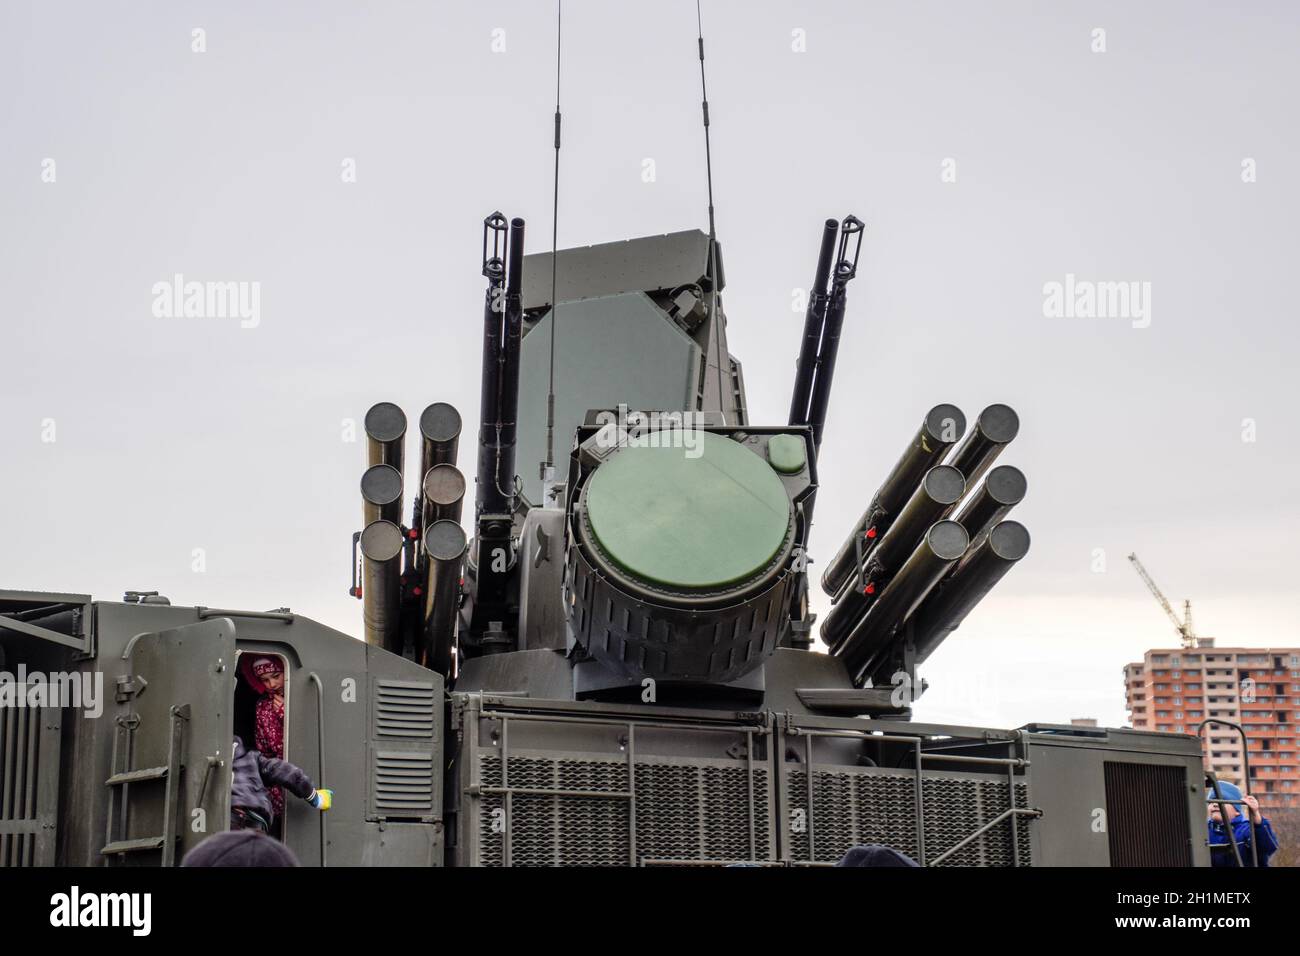 Russian self-propelled anti-aircraft missile and gun system (ZRPK) onshore and offshore Stock Photo